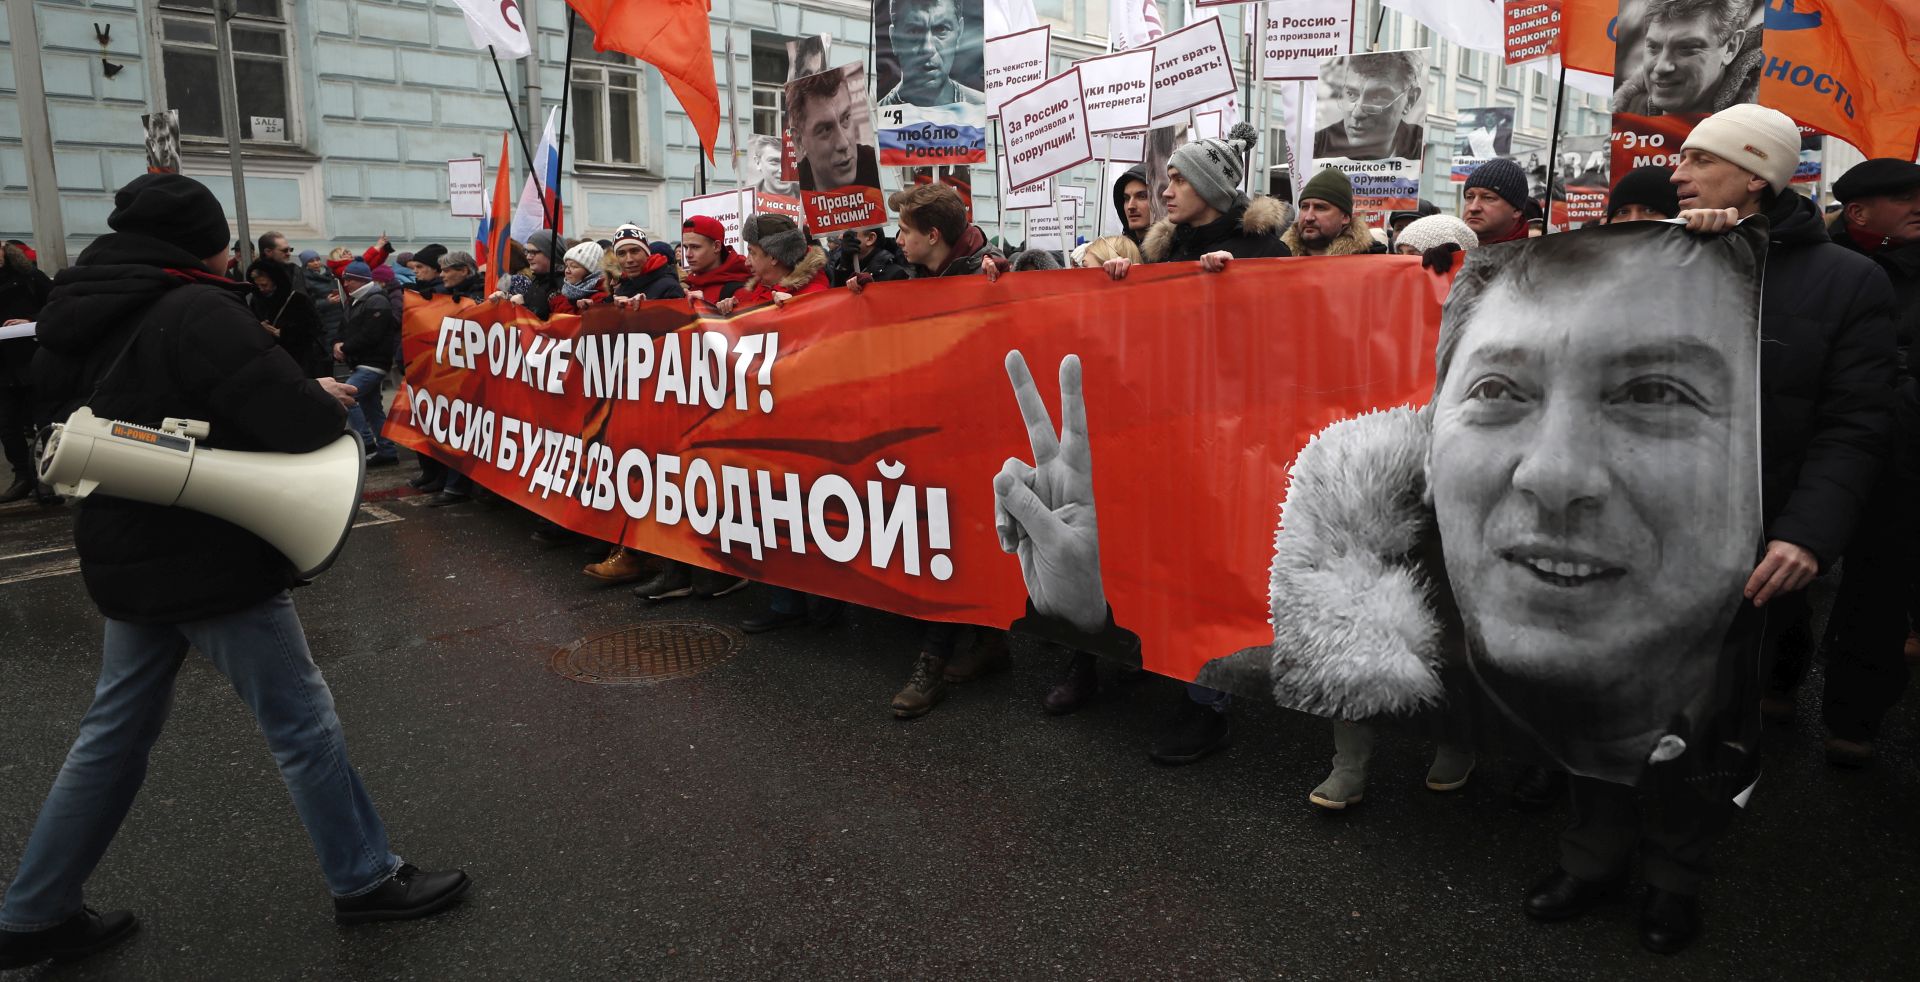 epa07392031 Opposition supporters take part in a memorial march for Boris Nemtsov to mark the fourth anniversary of his murder, in Moscow, Russia, 24 February 2019. Boris Nemtsov, a liberal opposition leader and sharp critic of Russian president Vladimir Putin, was killed on 27 February 2015 by a group of Chechen military servicemen. Five were arrested, one was killed during detention, and one of the organizers of the crime is still wanted.  EPA/MAXIM SHIPENKOV